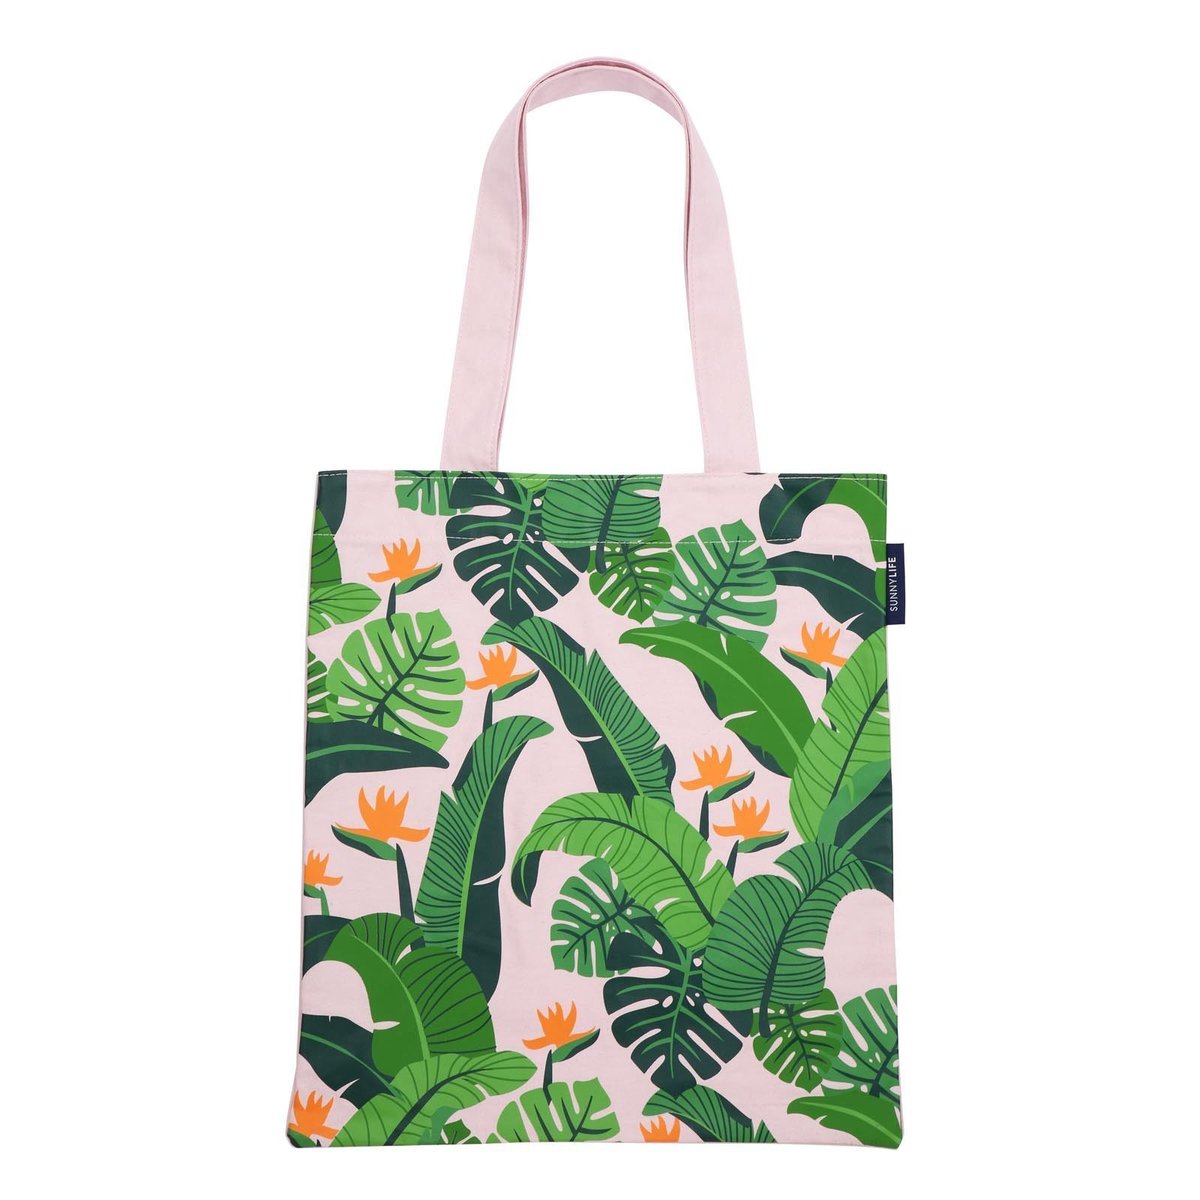 Tropical Print Tote Bag - By Sunnylife - Pinks & Green